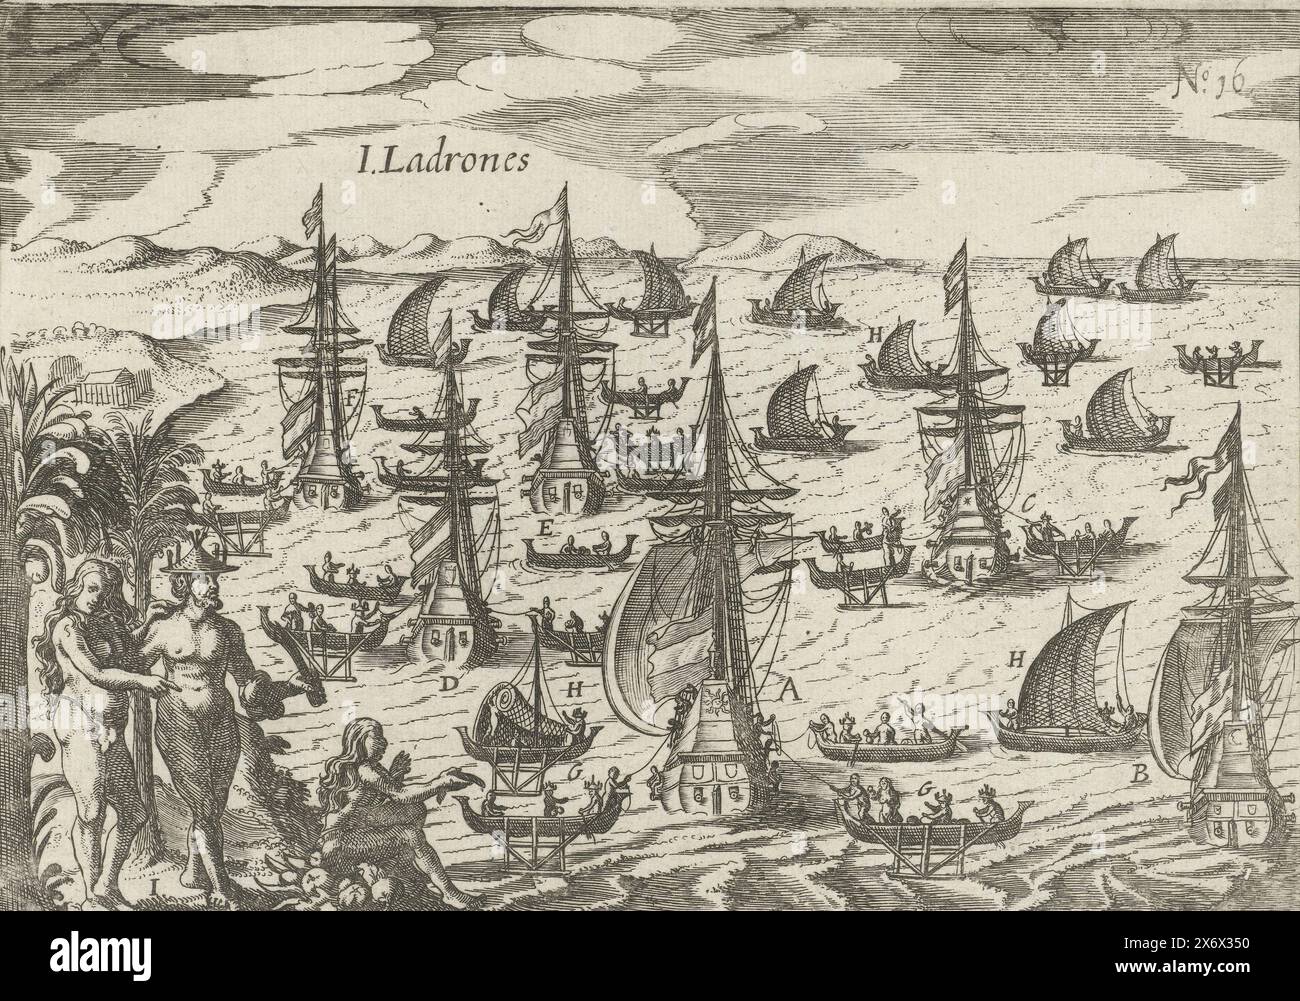 Arrival at the Ladrones Islands, 1616, I. Ladrones (title on object), Image of the Islas de Las Velas, ort Ladrones, Arrival of the fleet at the Ladrones or Mariana Islands, January 1616. The ships are at anchor: the Son, the Maen, the Morghen-Star, the Aeolus, the Hunter and the captured ship. In the water different types of local vessels. In the left foreground two examples of the local population. Part of the illustrations in the report of Joris van Spilbergen's journey around the world, 1614-1617, No. 16., print, print maker: anonymous, Northern Netherlands, 1617 - 1619 and/or 1646, paper, Stock Photo